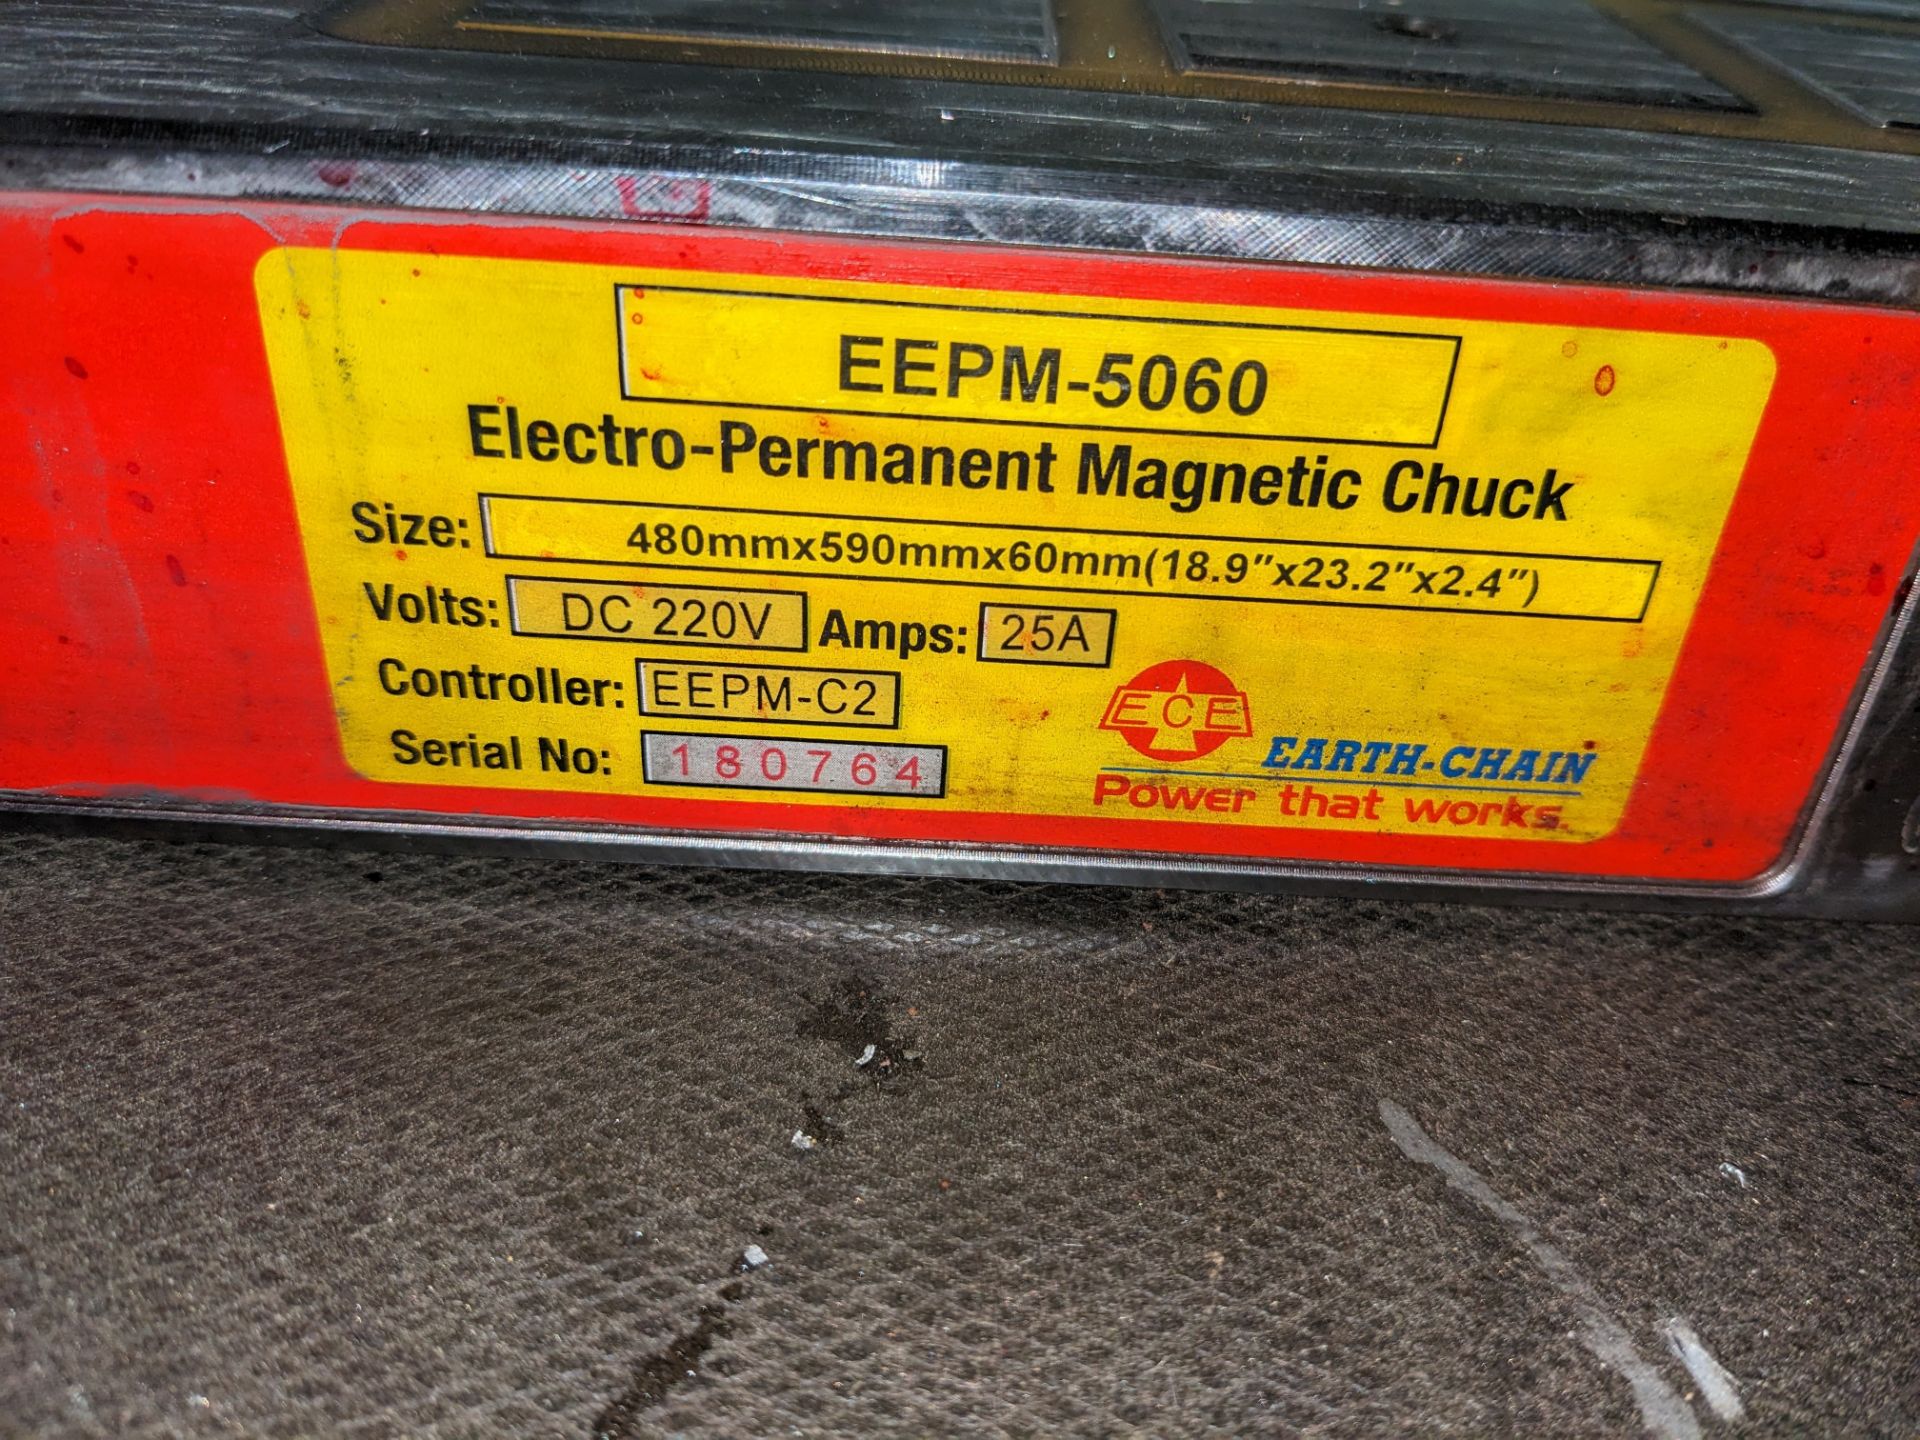 Earth Chain EEPM-5060 18.9" x 23.2" x 2.4" Electro-Permanent Magnetic Chuck - Image 2 of 4